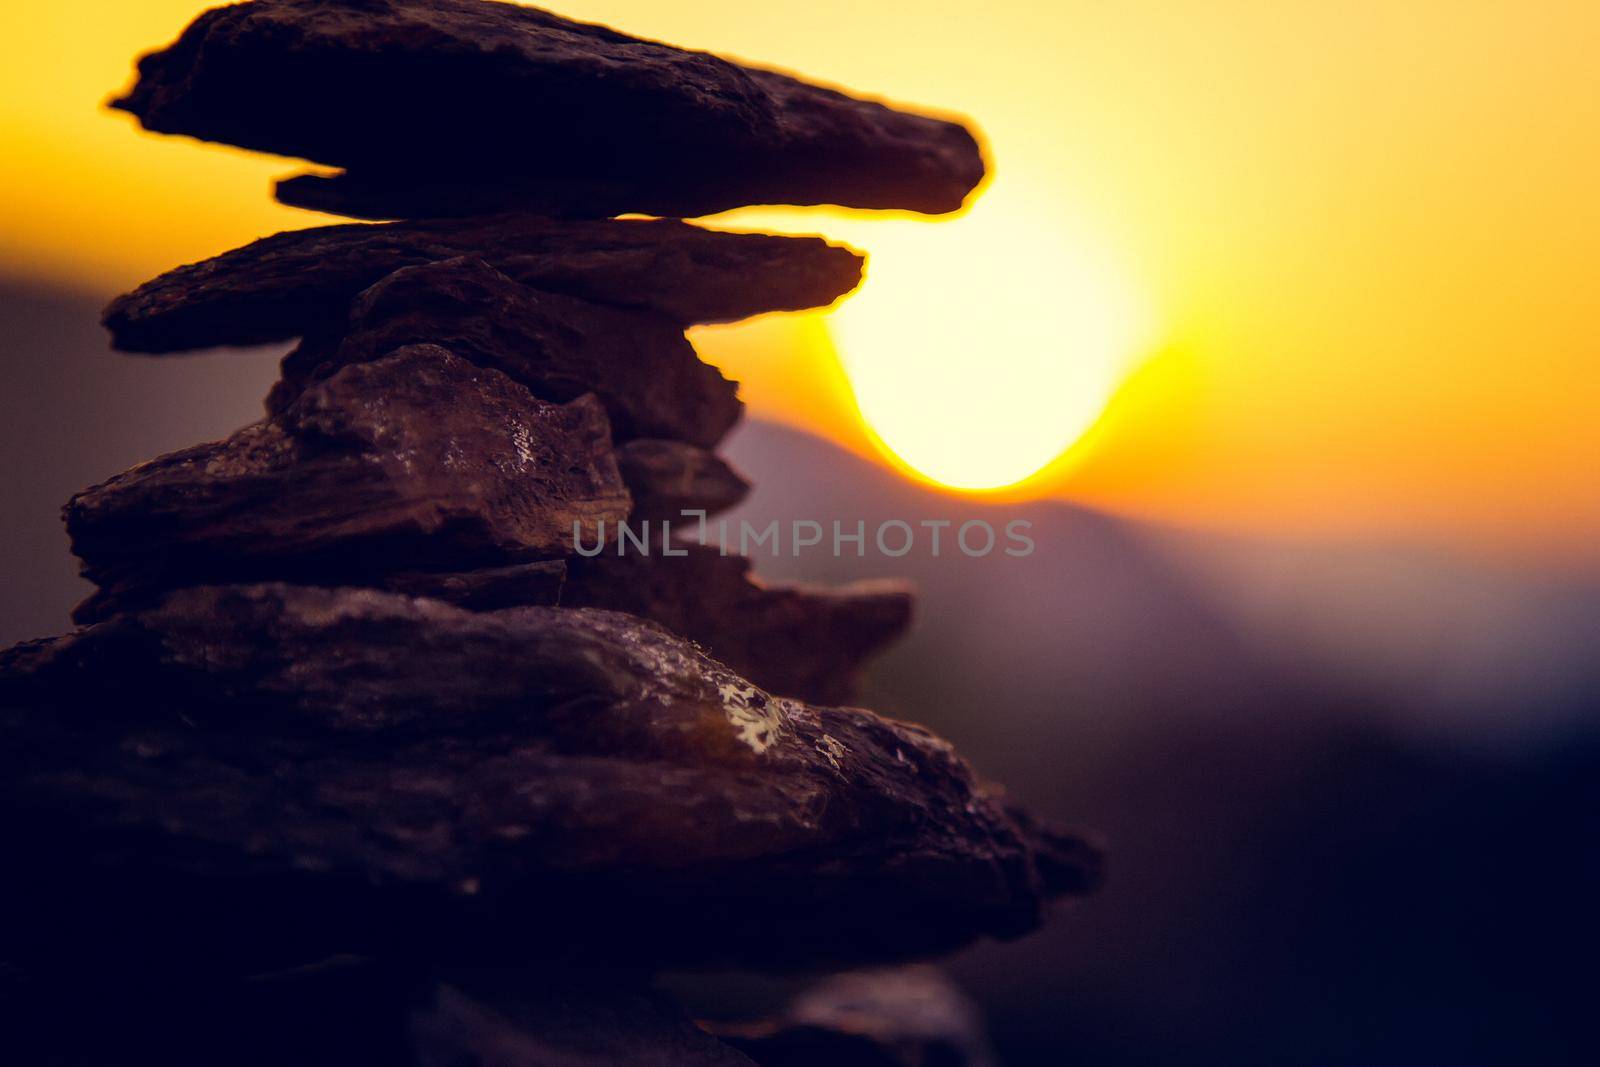 Spa stones balance, colorful summer sky background, silhouette of stacked pebbles and butterfly, beautiful nature, peaceful beach sunset, conceptual image of stable life by AlexGrec